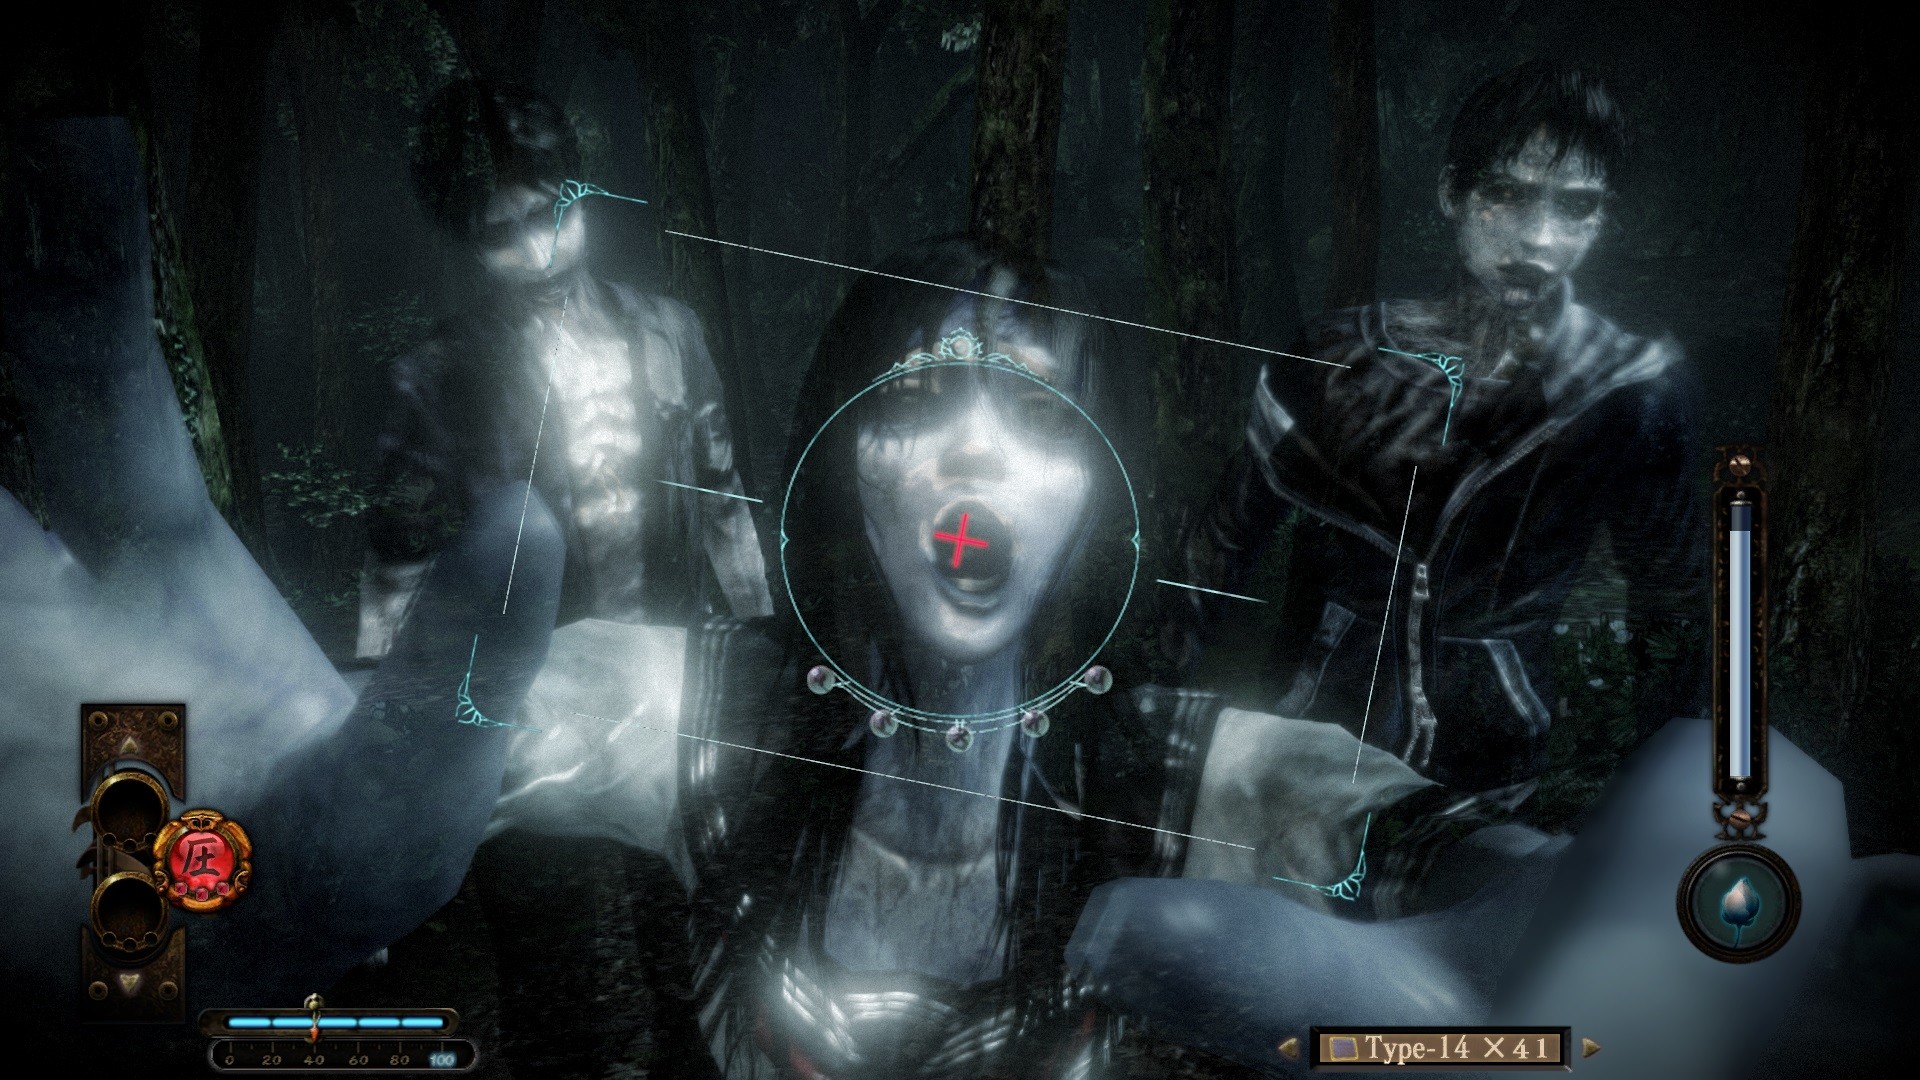 FATAL FRAME / PROJECT ZERO: Maiden Of Black Water Digital Deluxe Edition Steam CD Key